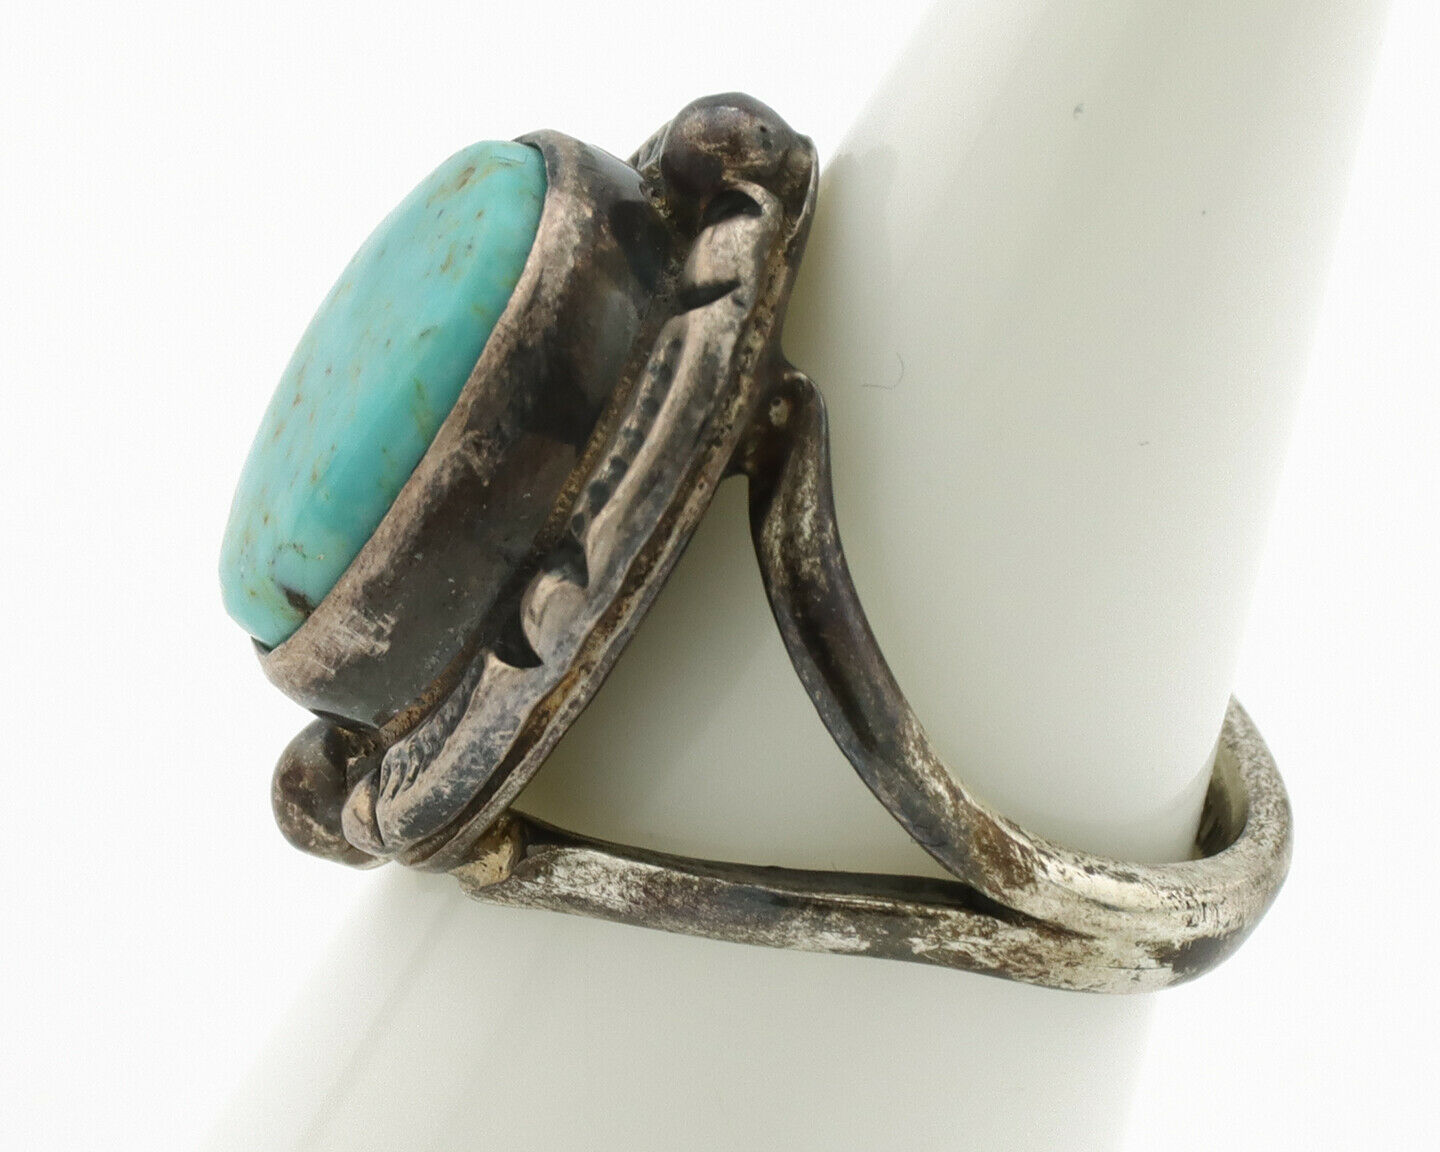 Navajo Ring .925 Silver Blue Turquoise Artist Signed Gecko C.1980's